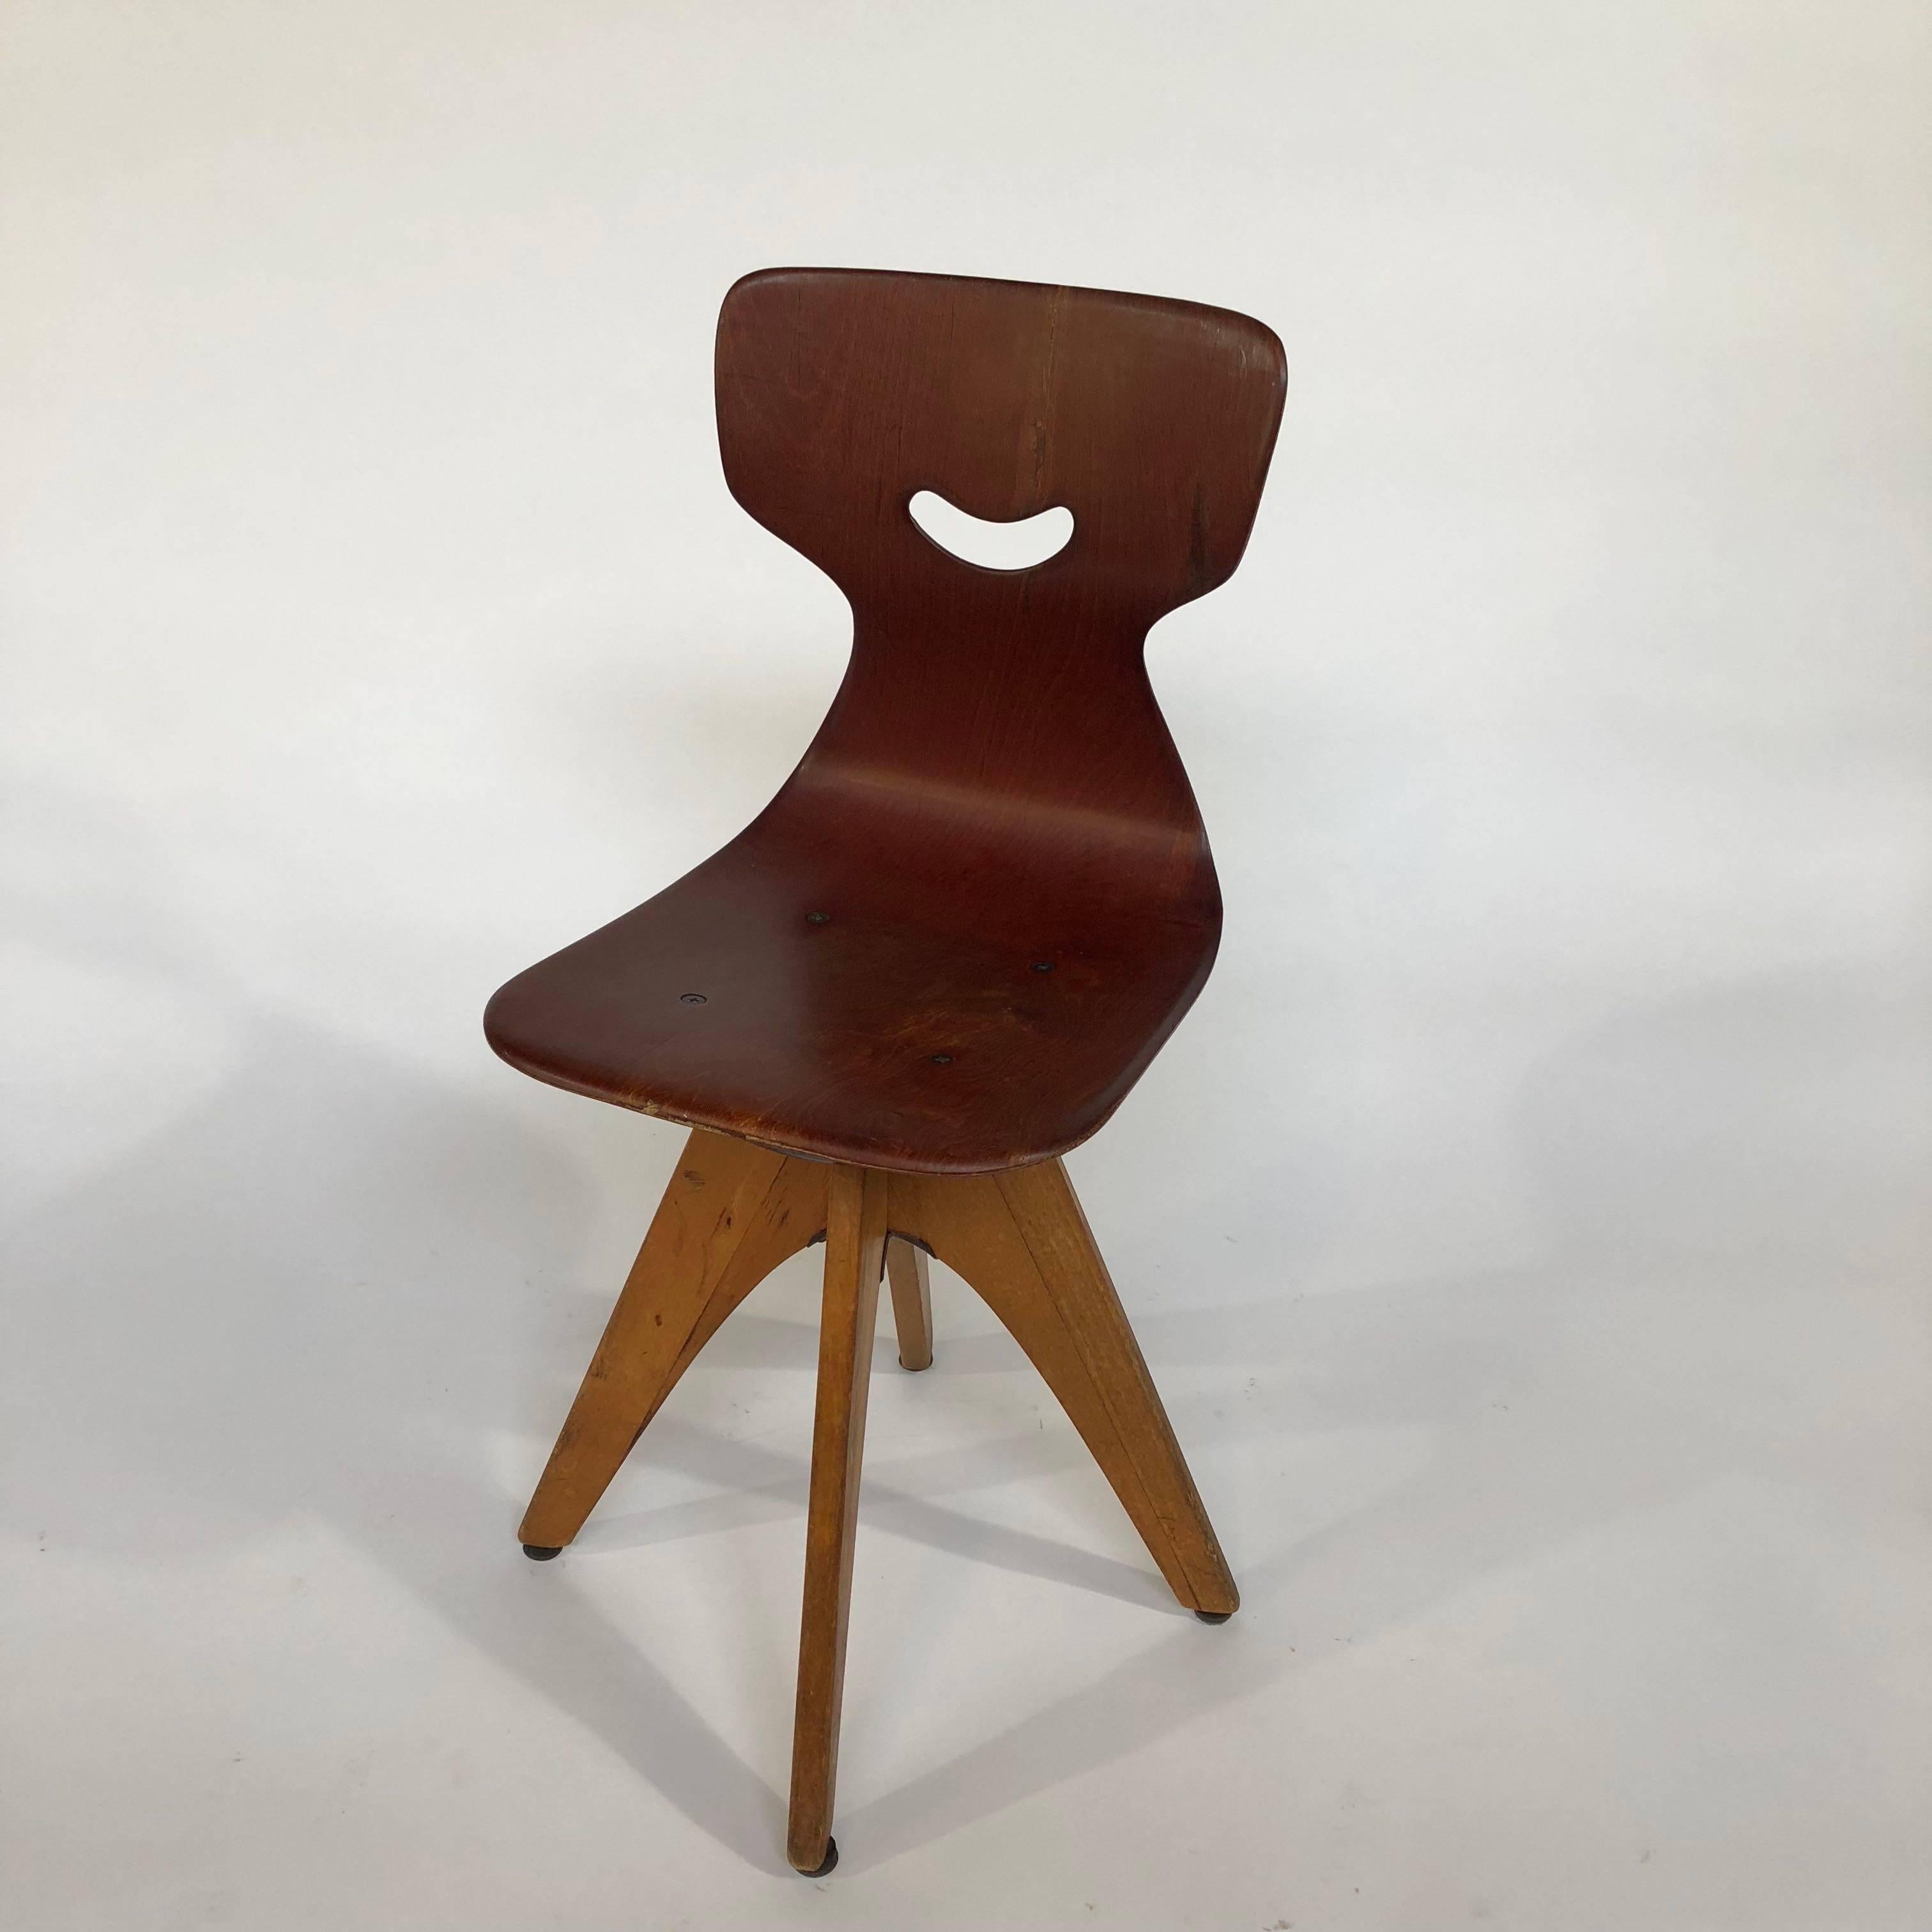 This reform swivel chair was manufactured Flötotto in Germany the 1950s. It features a beech frame and a pagwood seat mounted on a Bakelite casing. The chair was designed by Adam Stegner. It was produced for the schulmobel line and have the